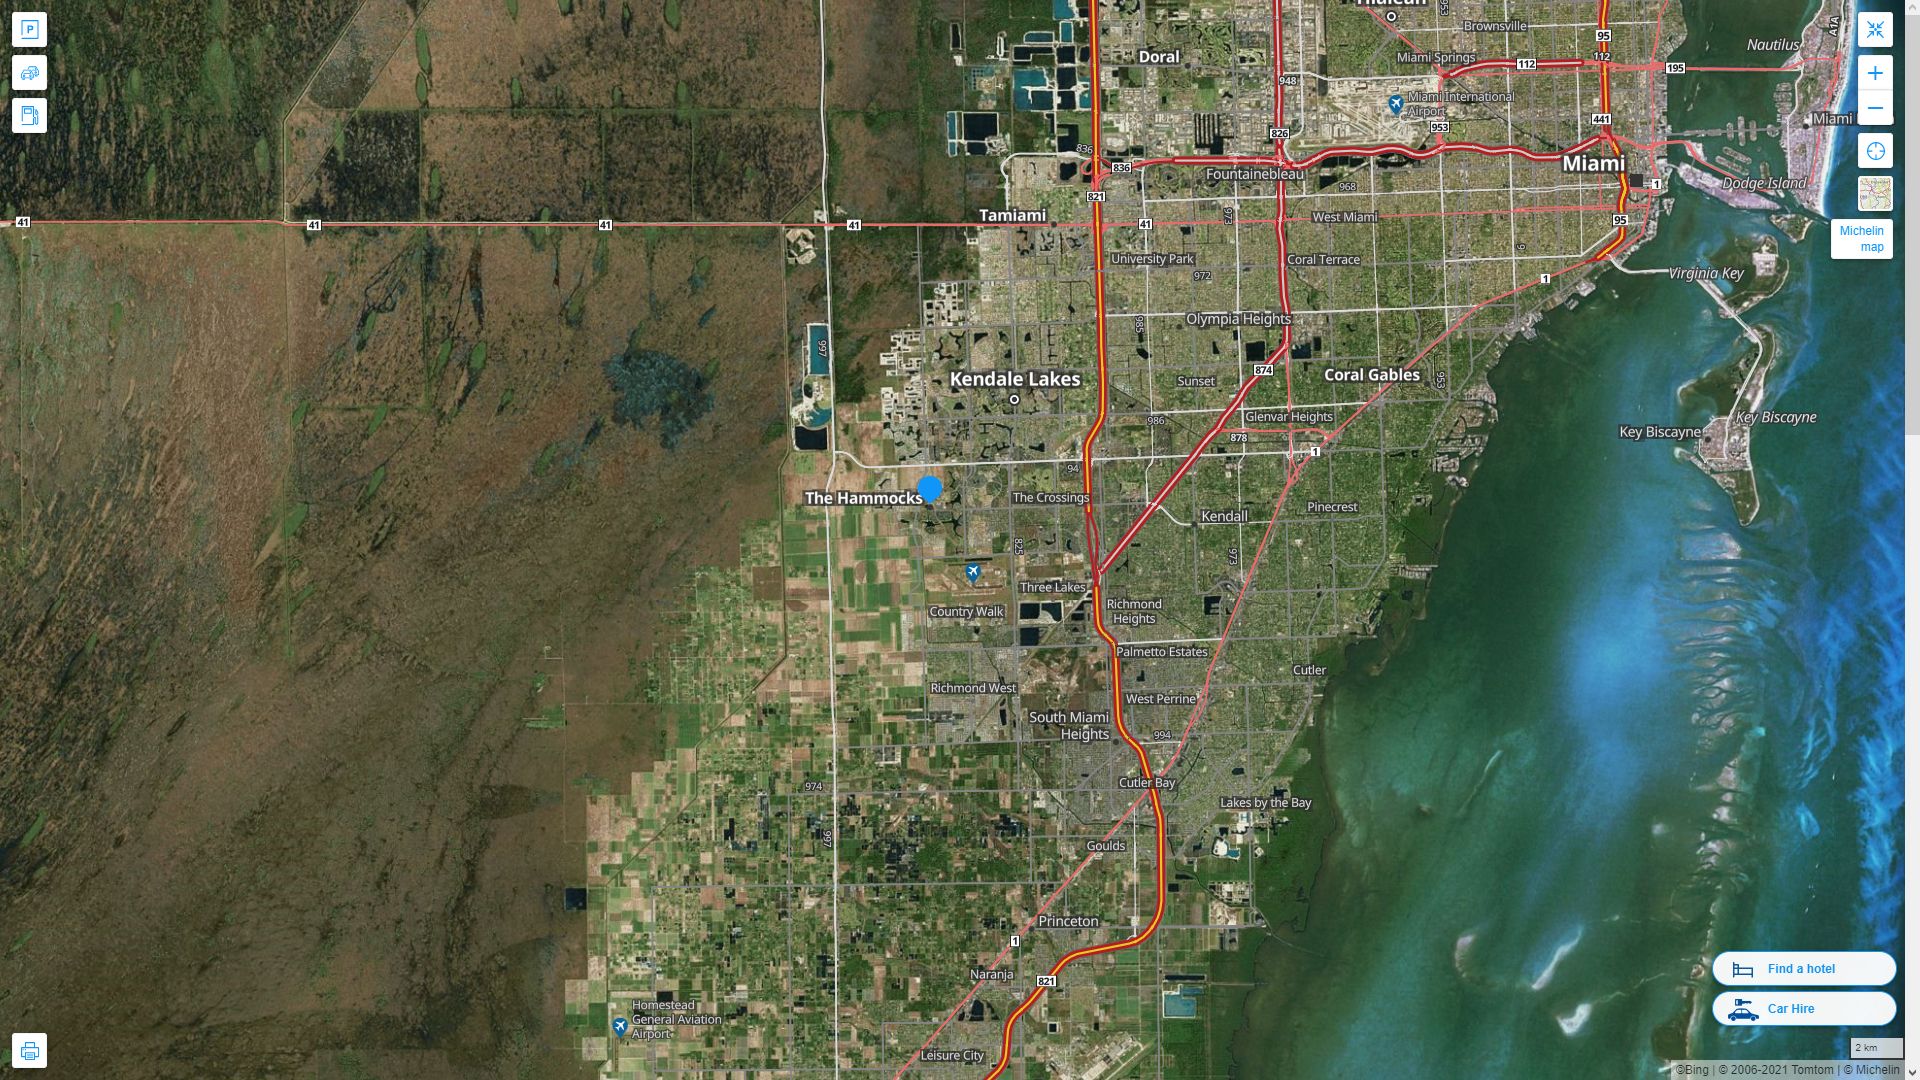 The Hammocks Florida Highway and Road Map with Satellite View